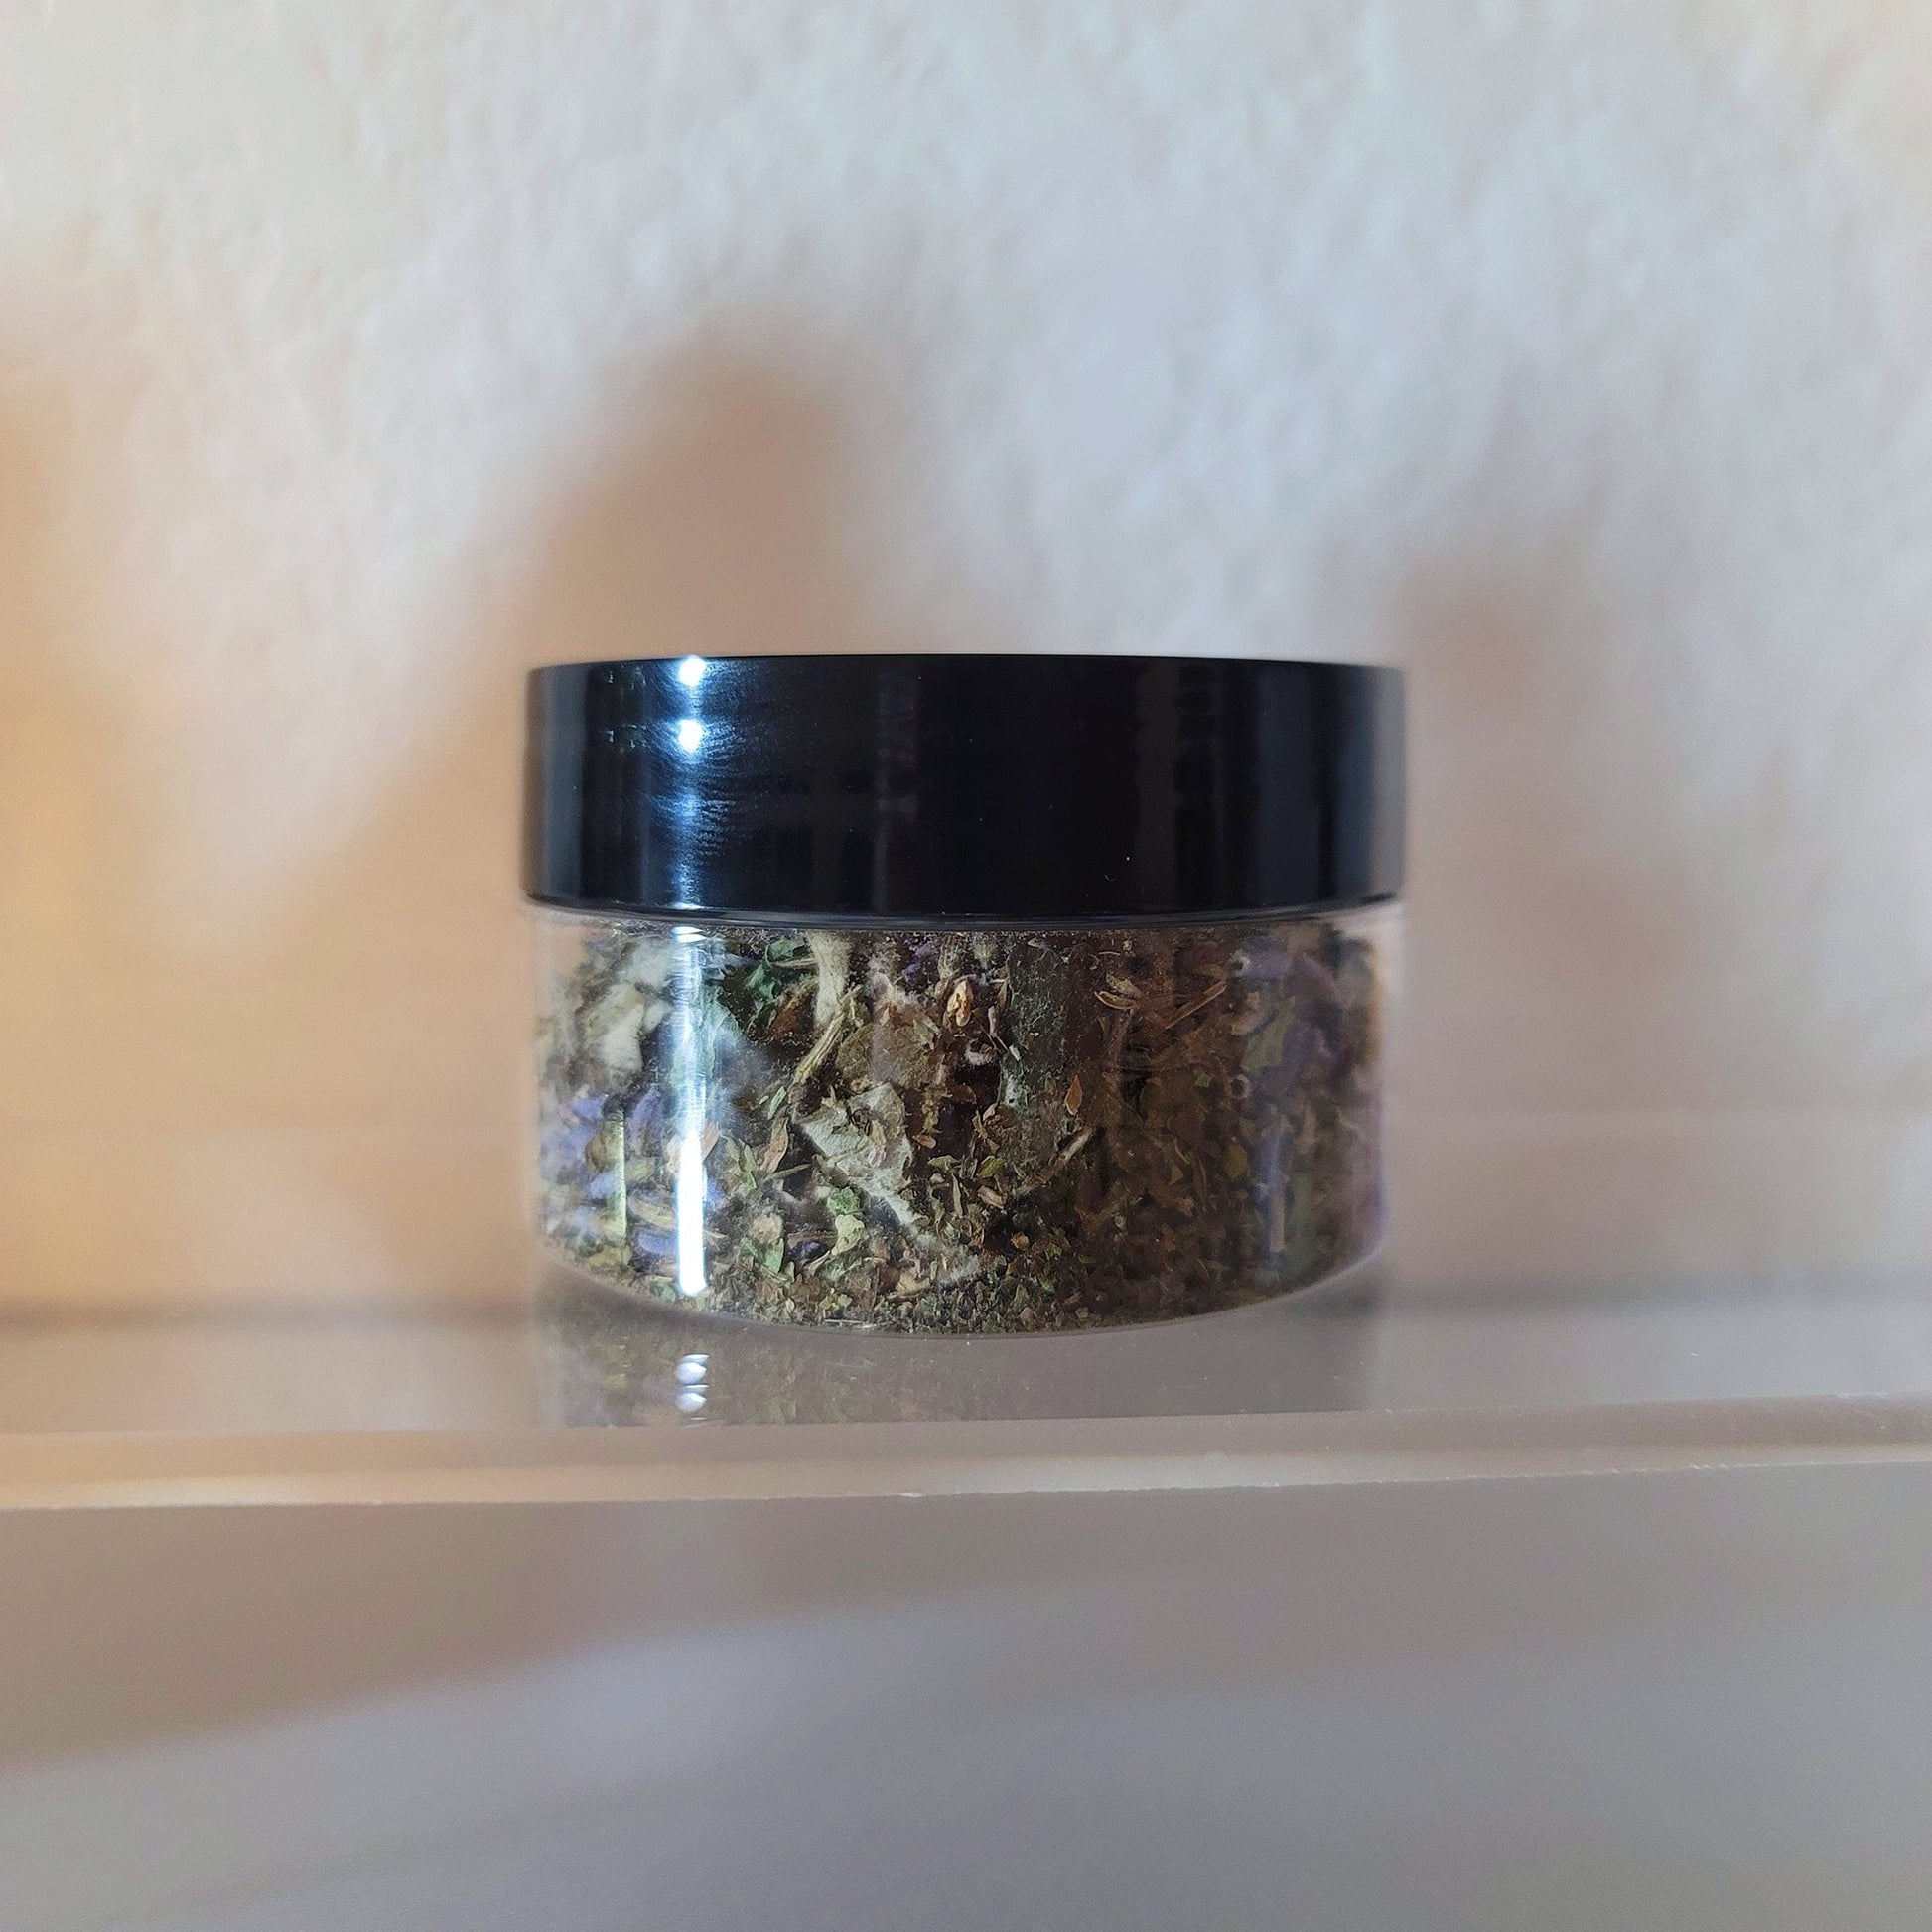 HEKATE Herbal Incense Blend - work, connect, and honor Hecate - Goddess of Crossroads, Witchcraft, Necromancy, Magick - Shrine & Altar Tools